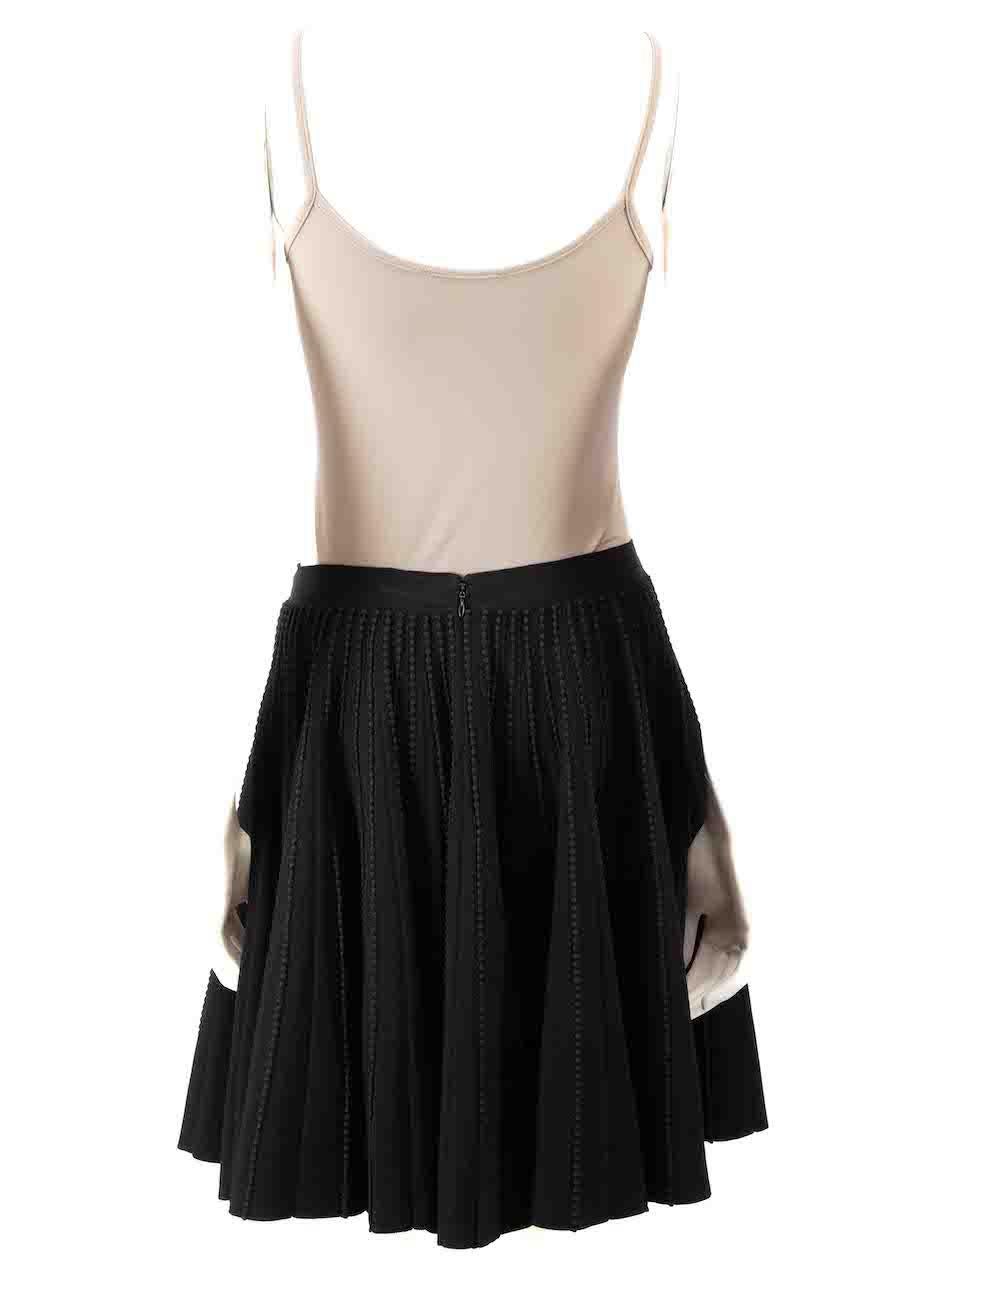 Azzedine Alaïa Black Flared Mini Skirt Size S In Excellent Condition For Sale In London, GB